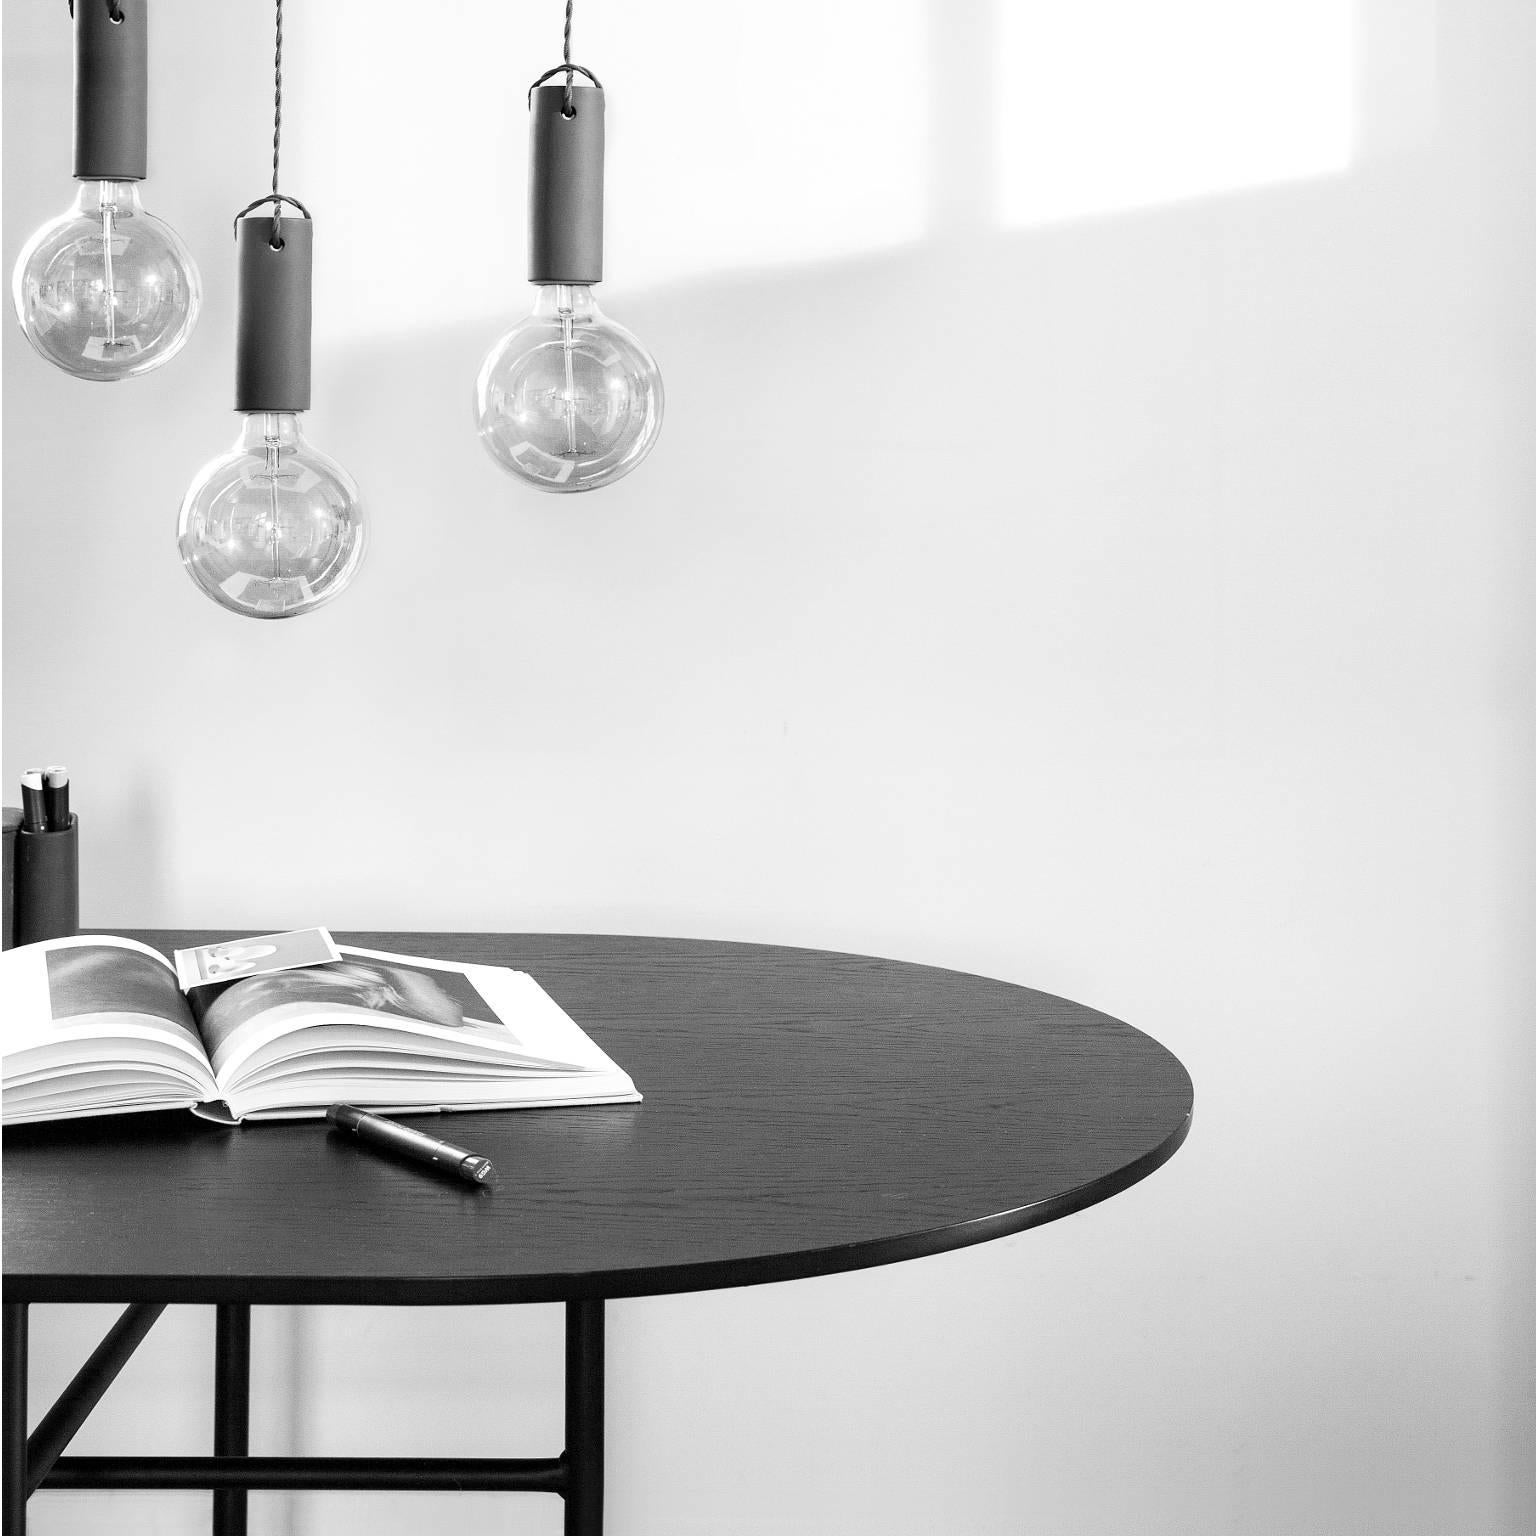 Powder-Coated Oval Snaregade Table by Norm Architects, Black Veneer